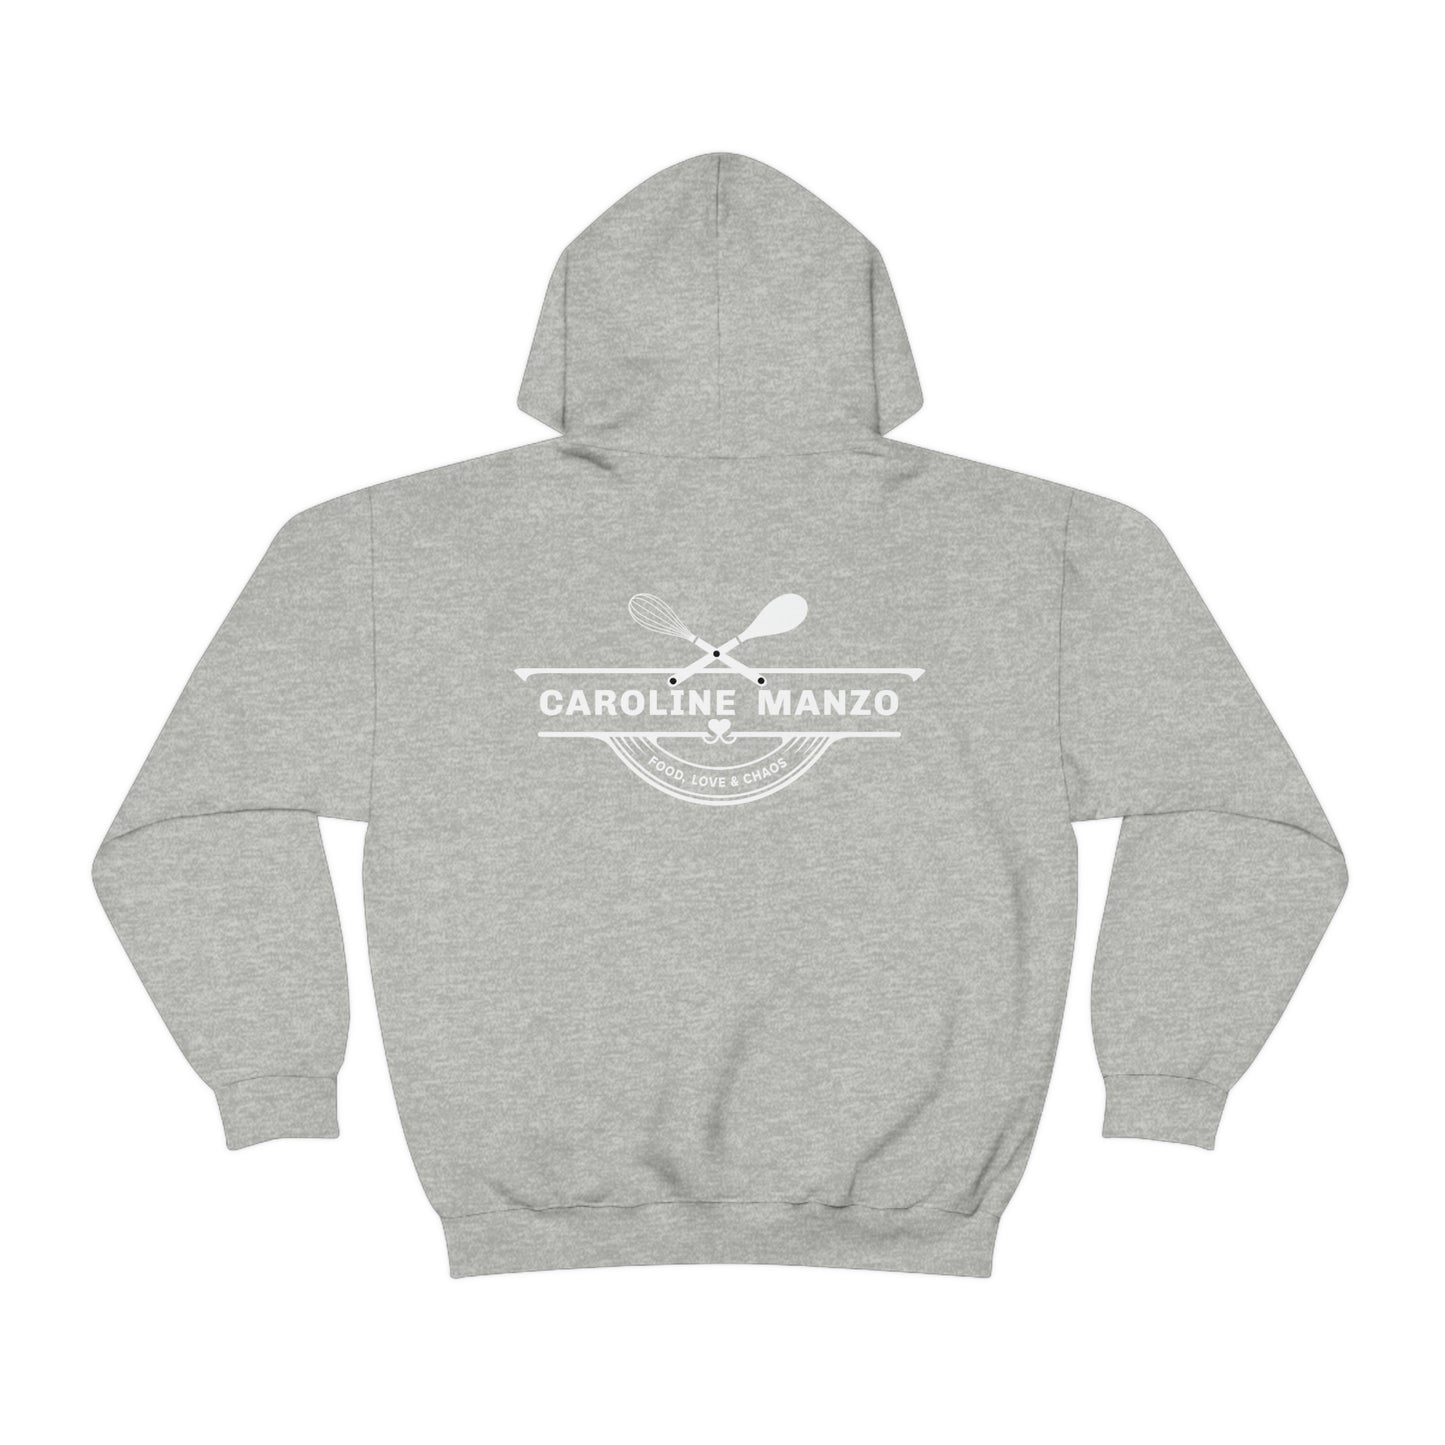 "No such thing as one clove of garlic" Unisex Heavy Blend™ Hooded Sweatshirt